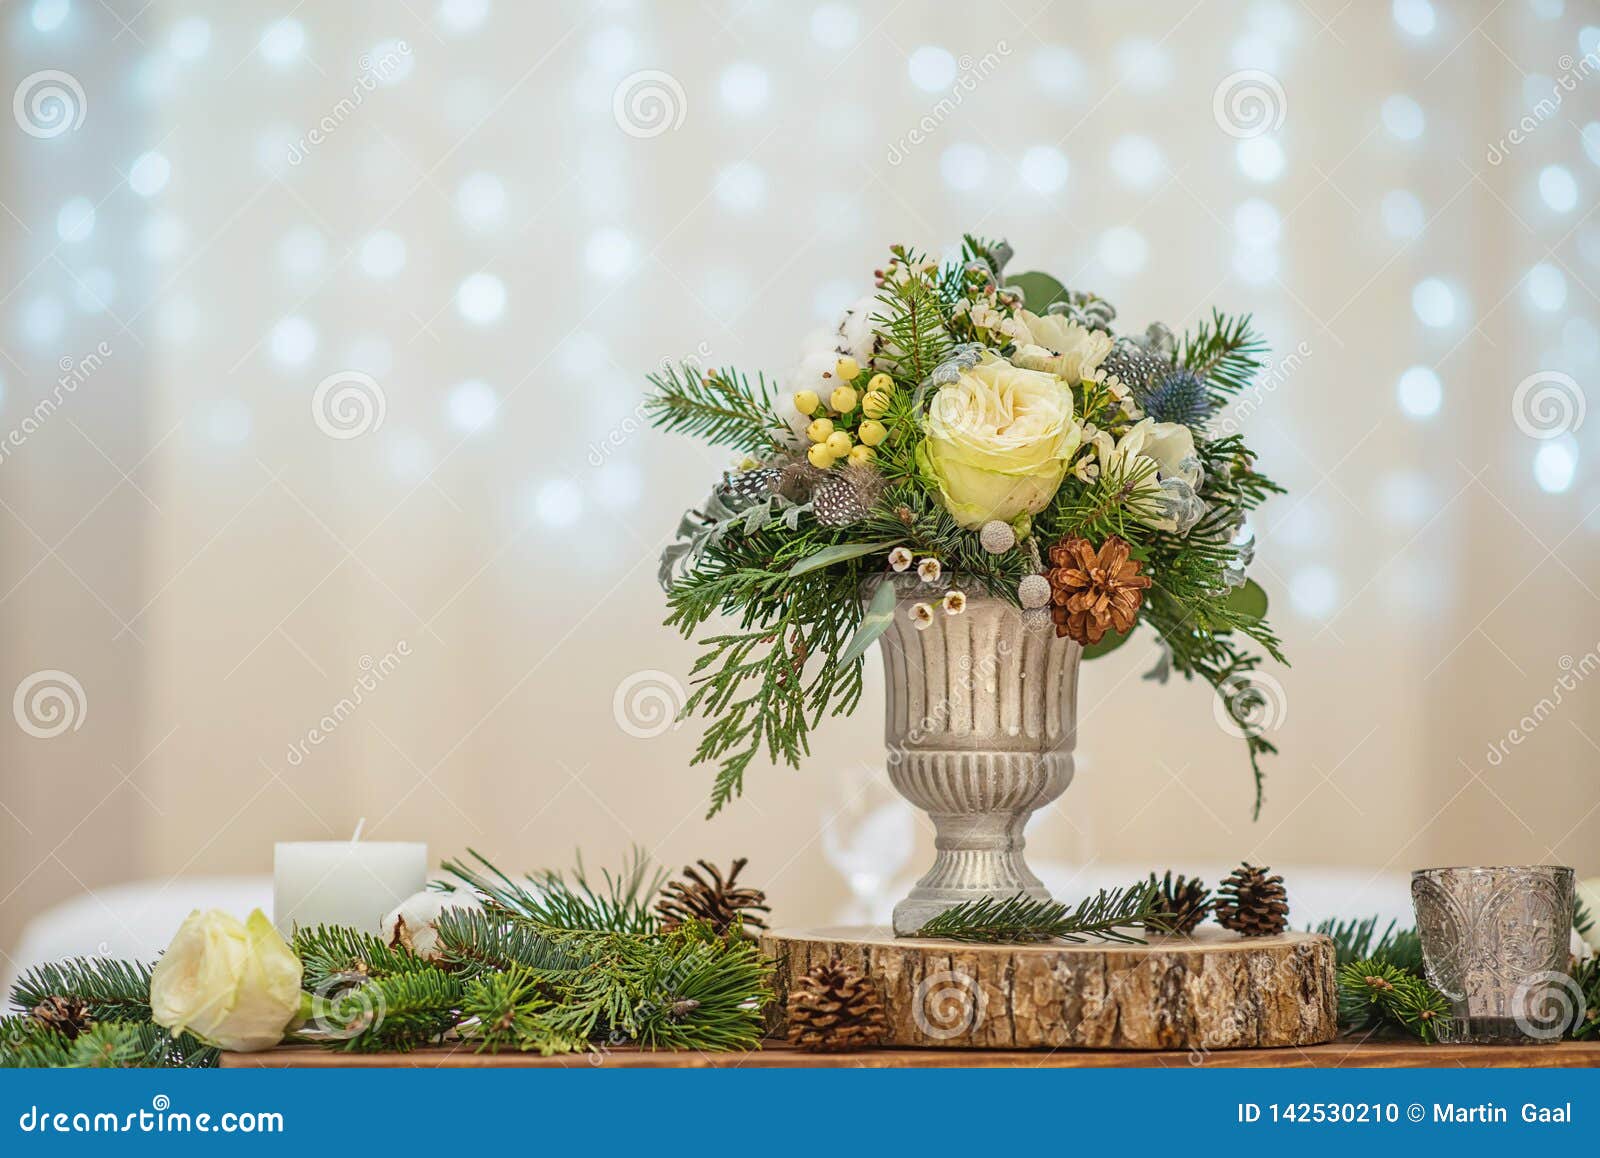 wedding table with floral arrangement prepared for reception, wedding, birthday or event centerpiece